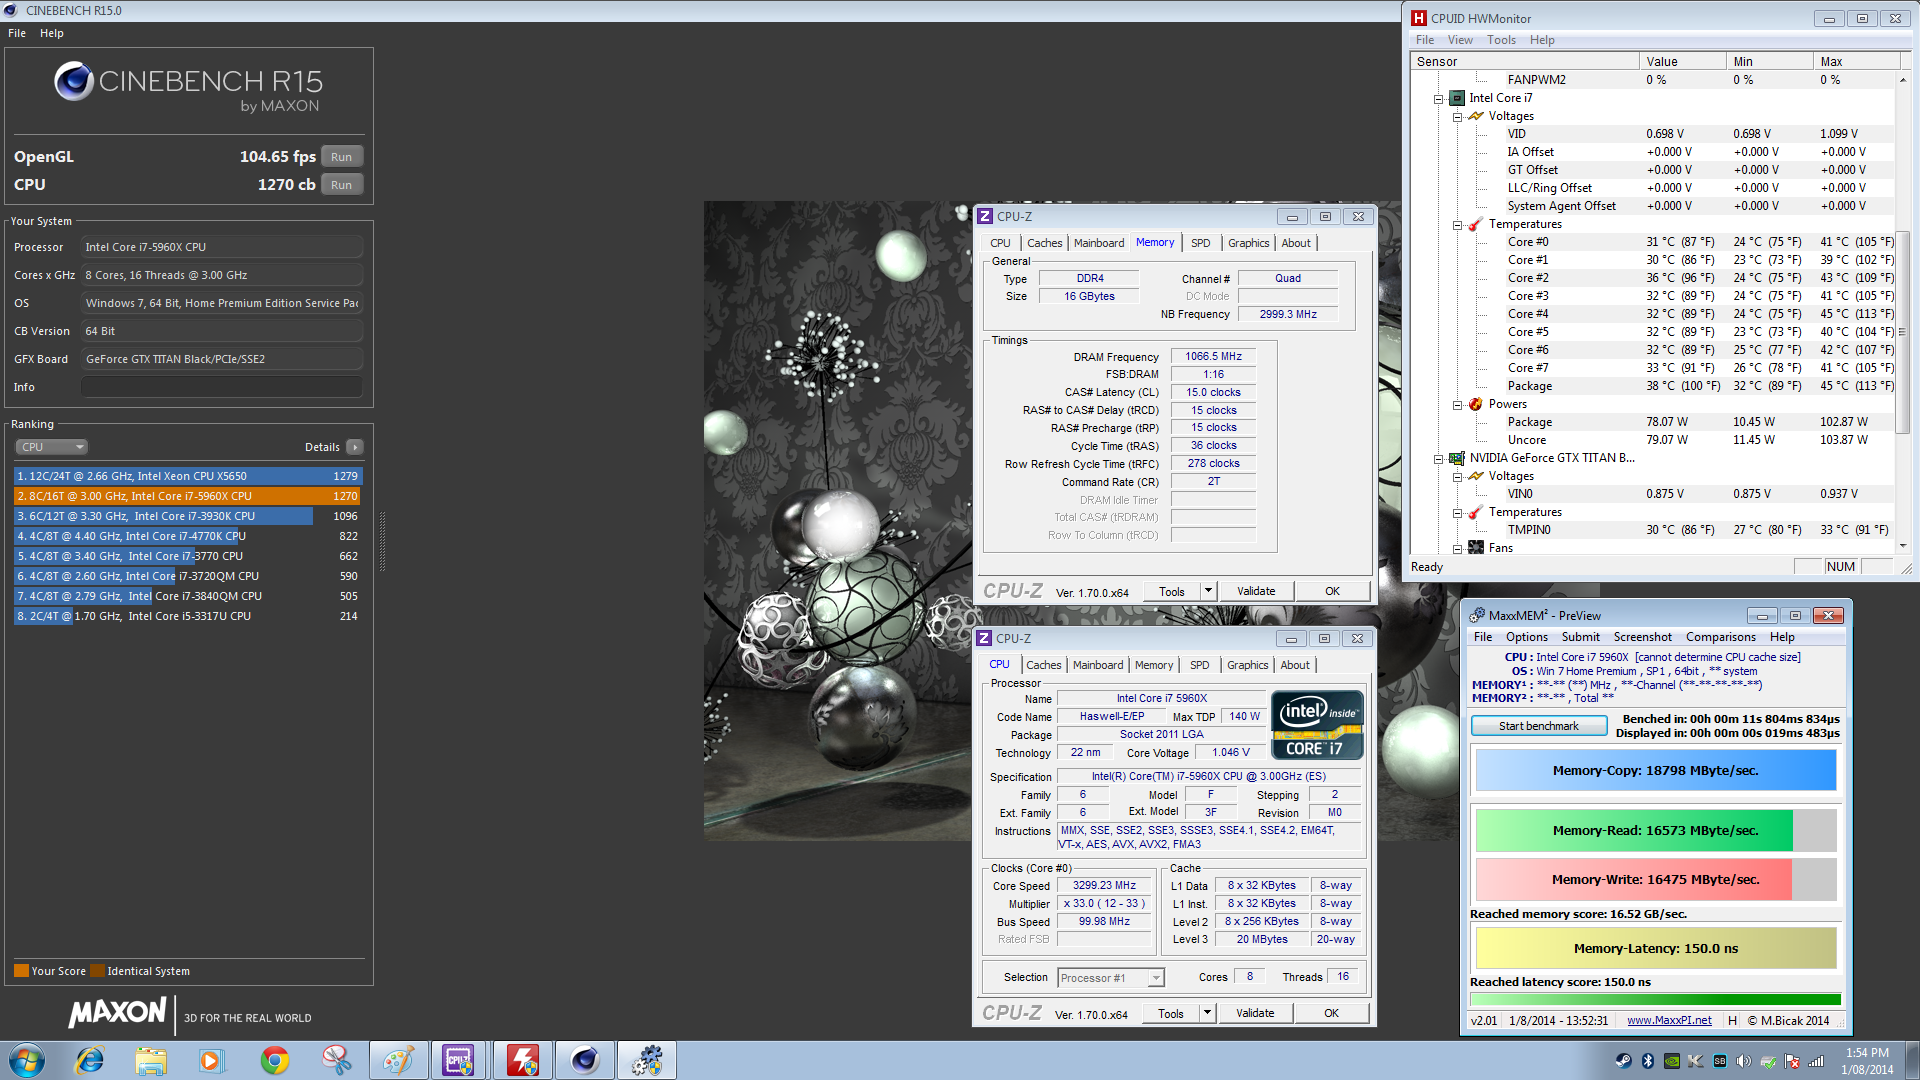 Intel Core i7 5960X Benchmarked and Overclocked